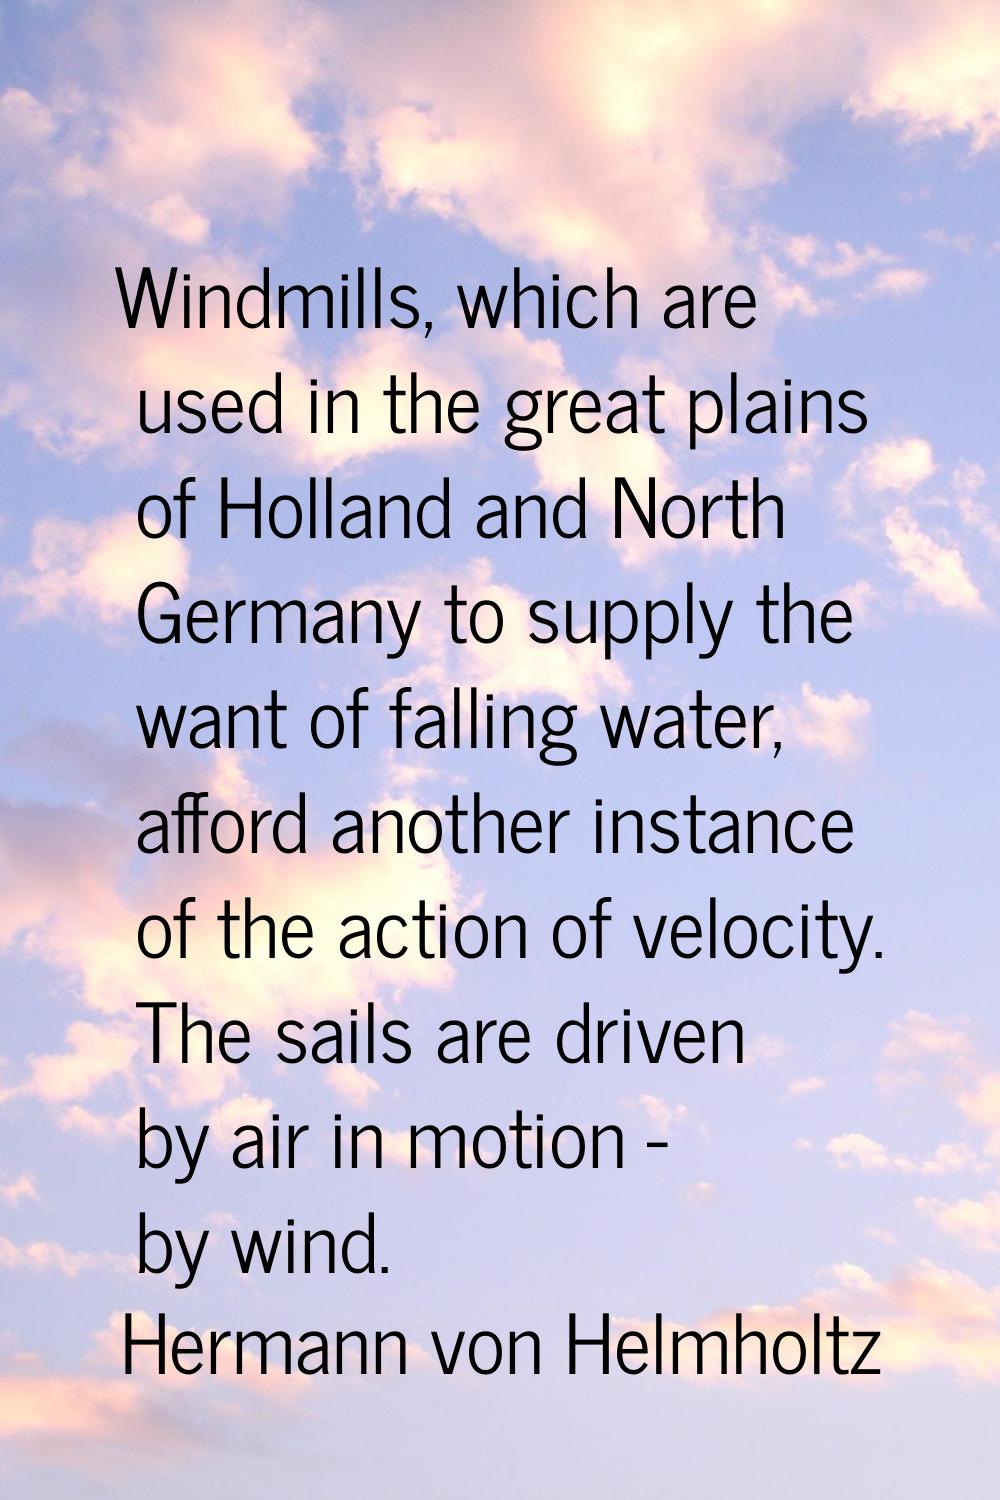 Windmills, which are used in the great plains of Holland and North Germany to supply the want of fa